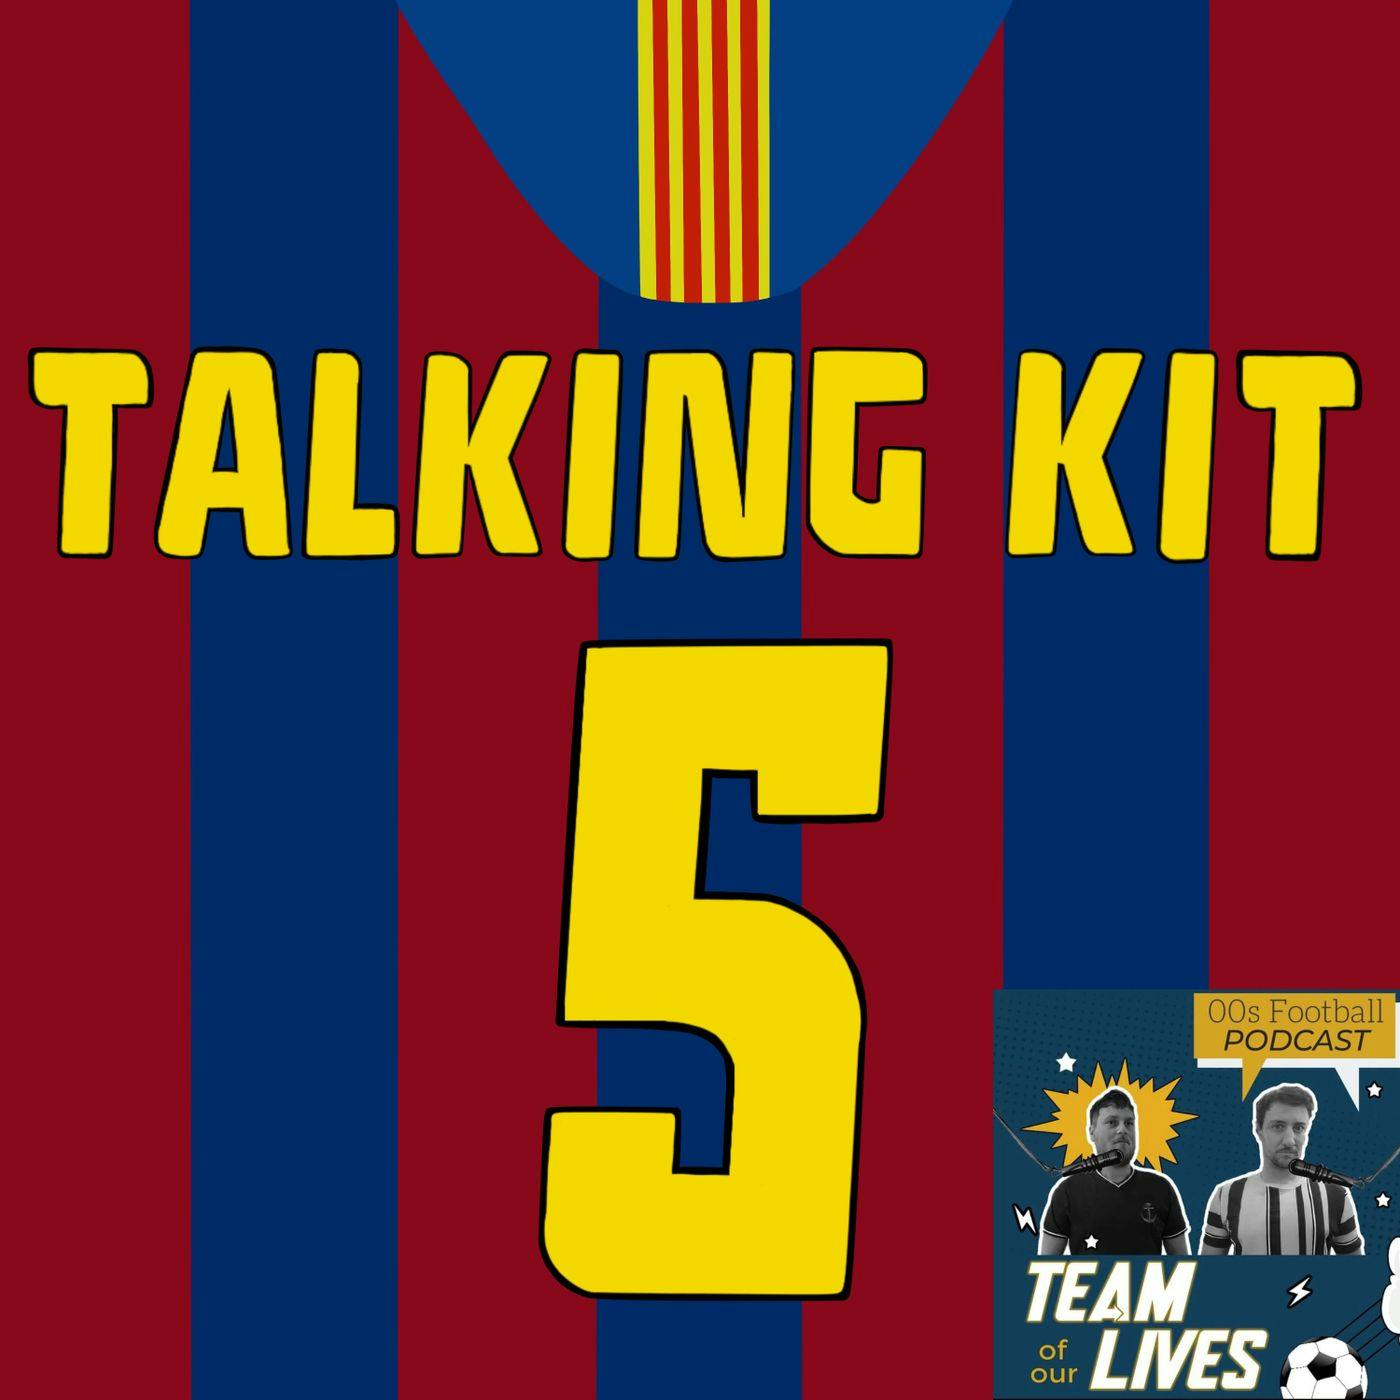 The Talking Kit Podcast: Episode 5 (feat. Team of our Lives)